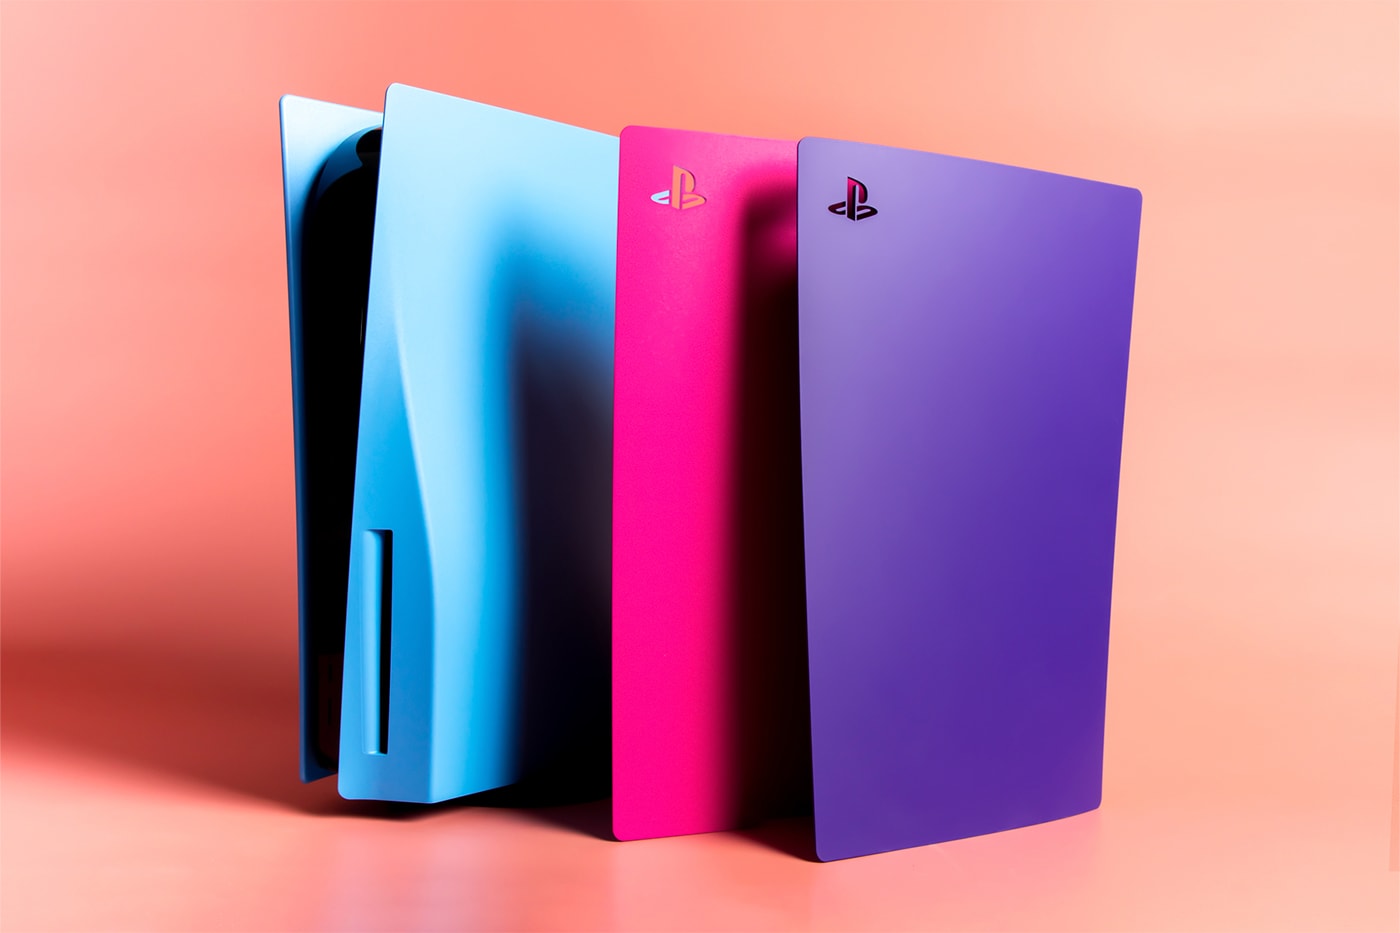 Sony shows off upcoming PS5 Slim console covers